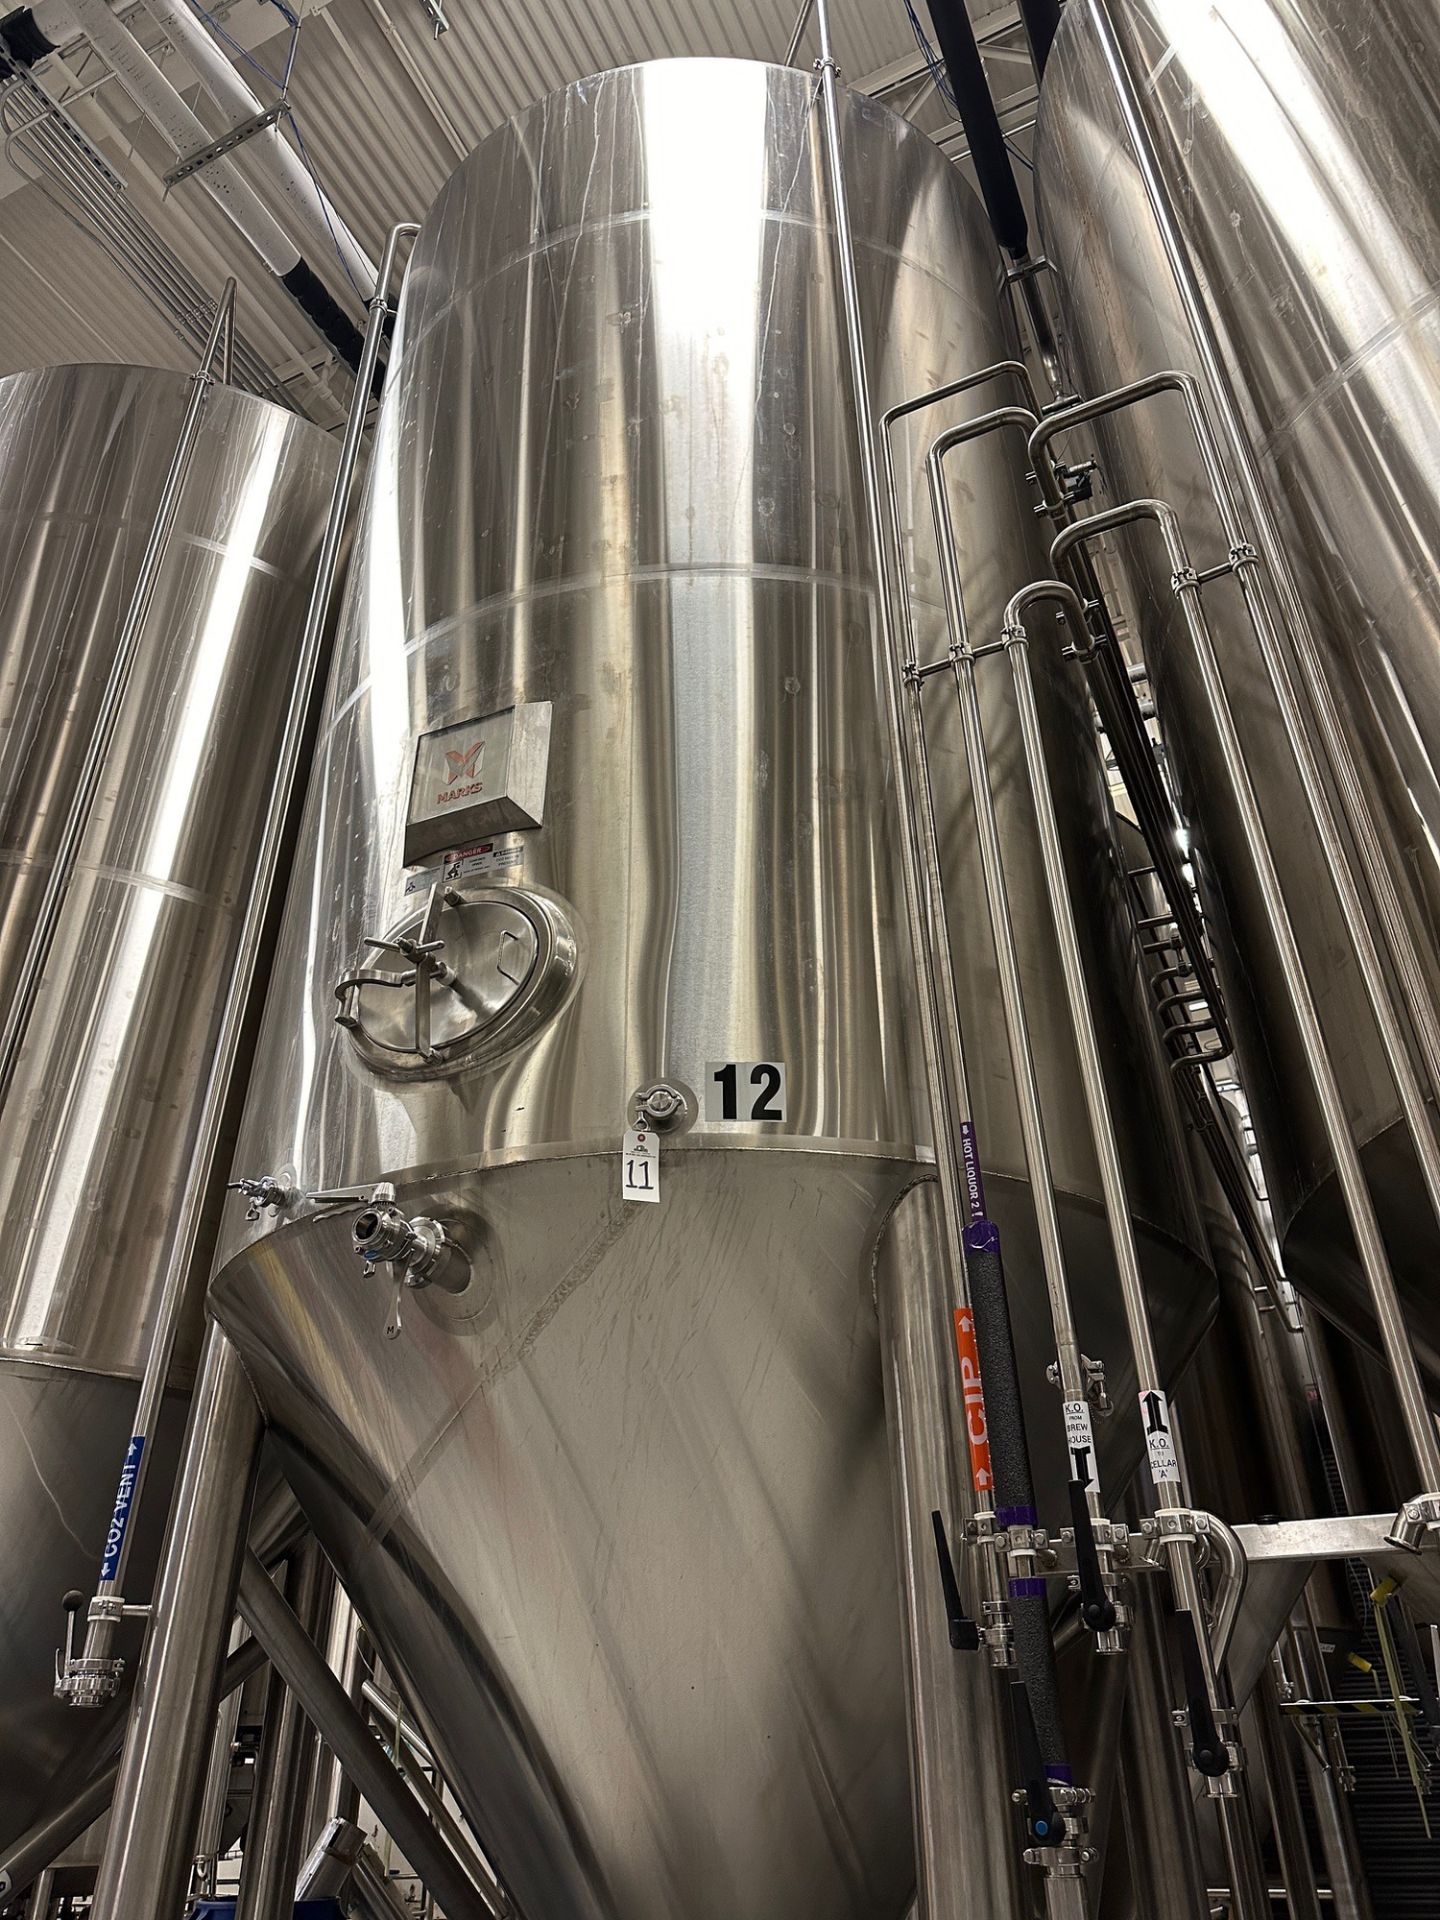 (1 of 8) 2020 Marks 132 BBL FV / 175 BBL or 5,400 Gal Max Capacity Jacketed Stainless Steel Ferm